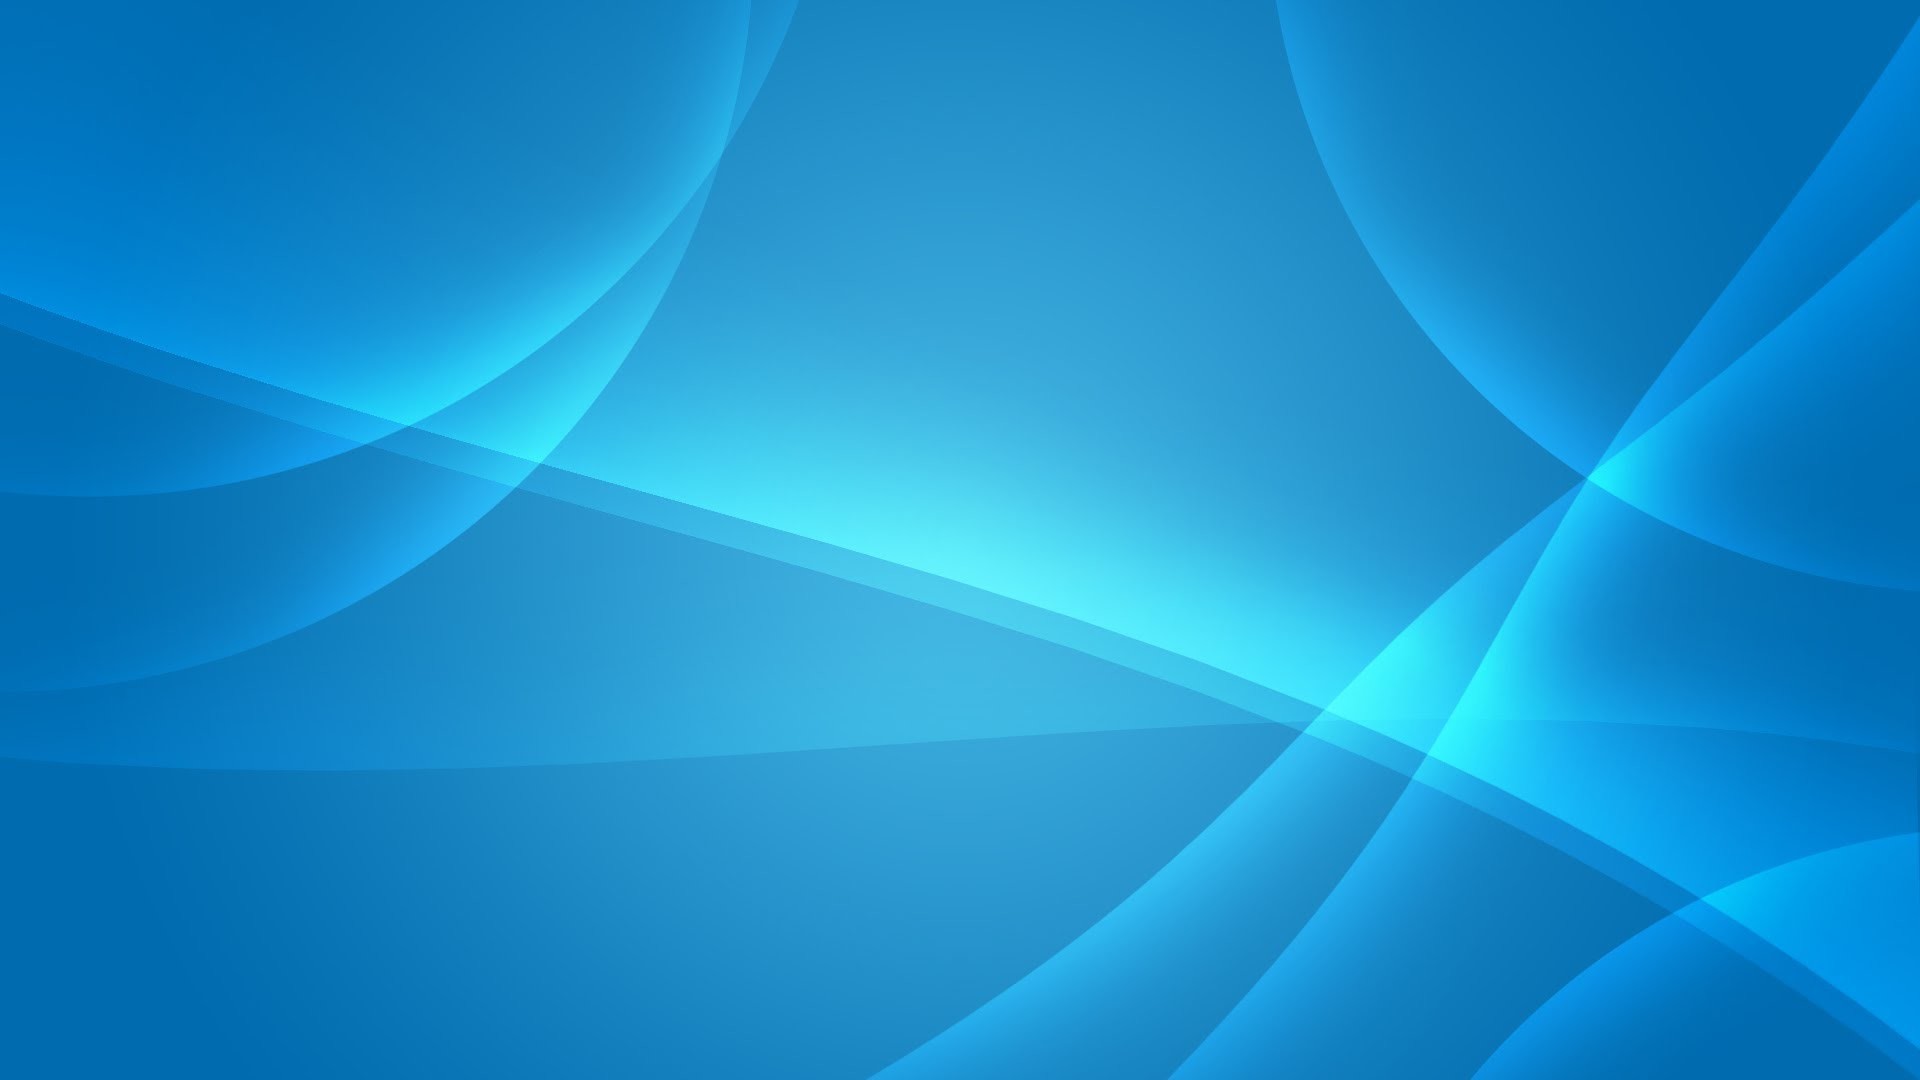 1920x1080 ... HD 1080p Backgrounds  How to Create a Windows Vista Style  Wallpaper in Photoshop